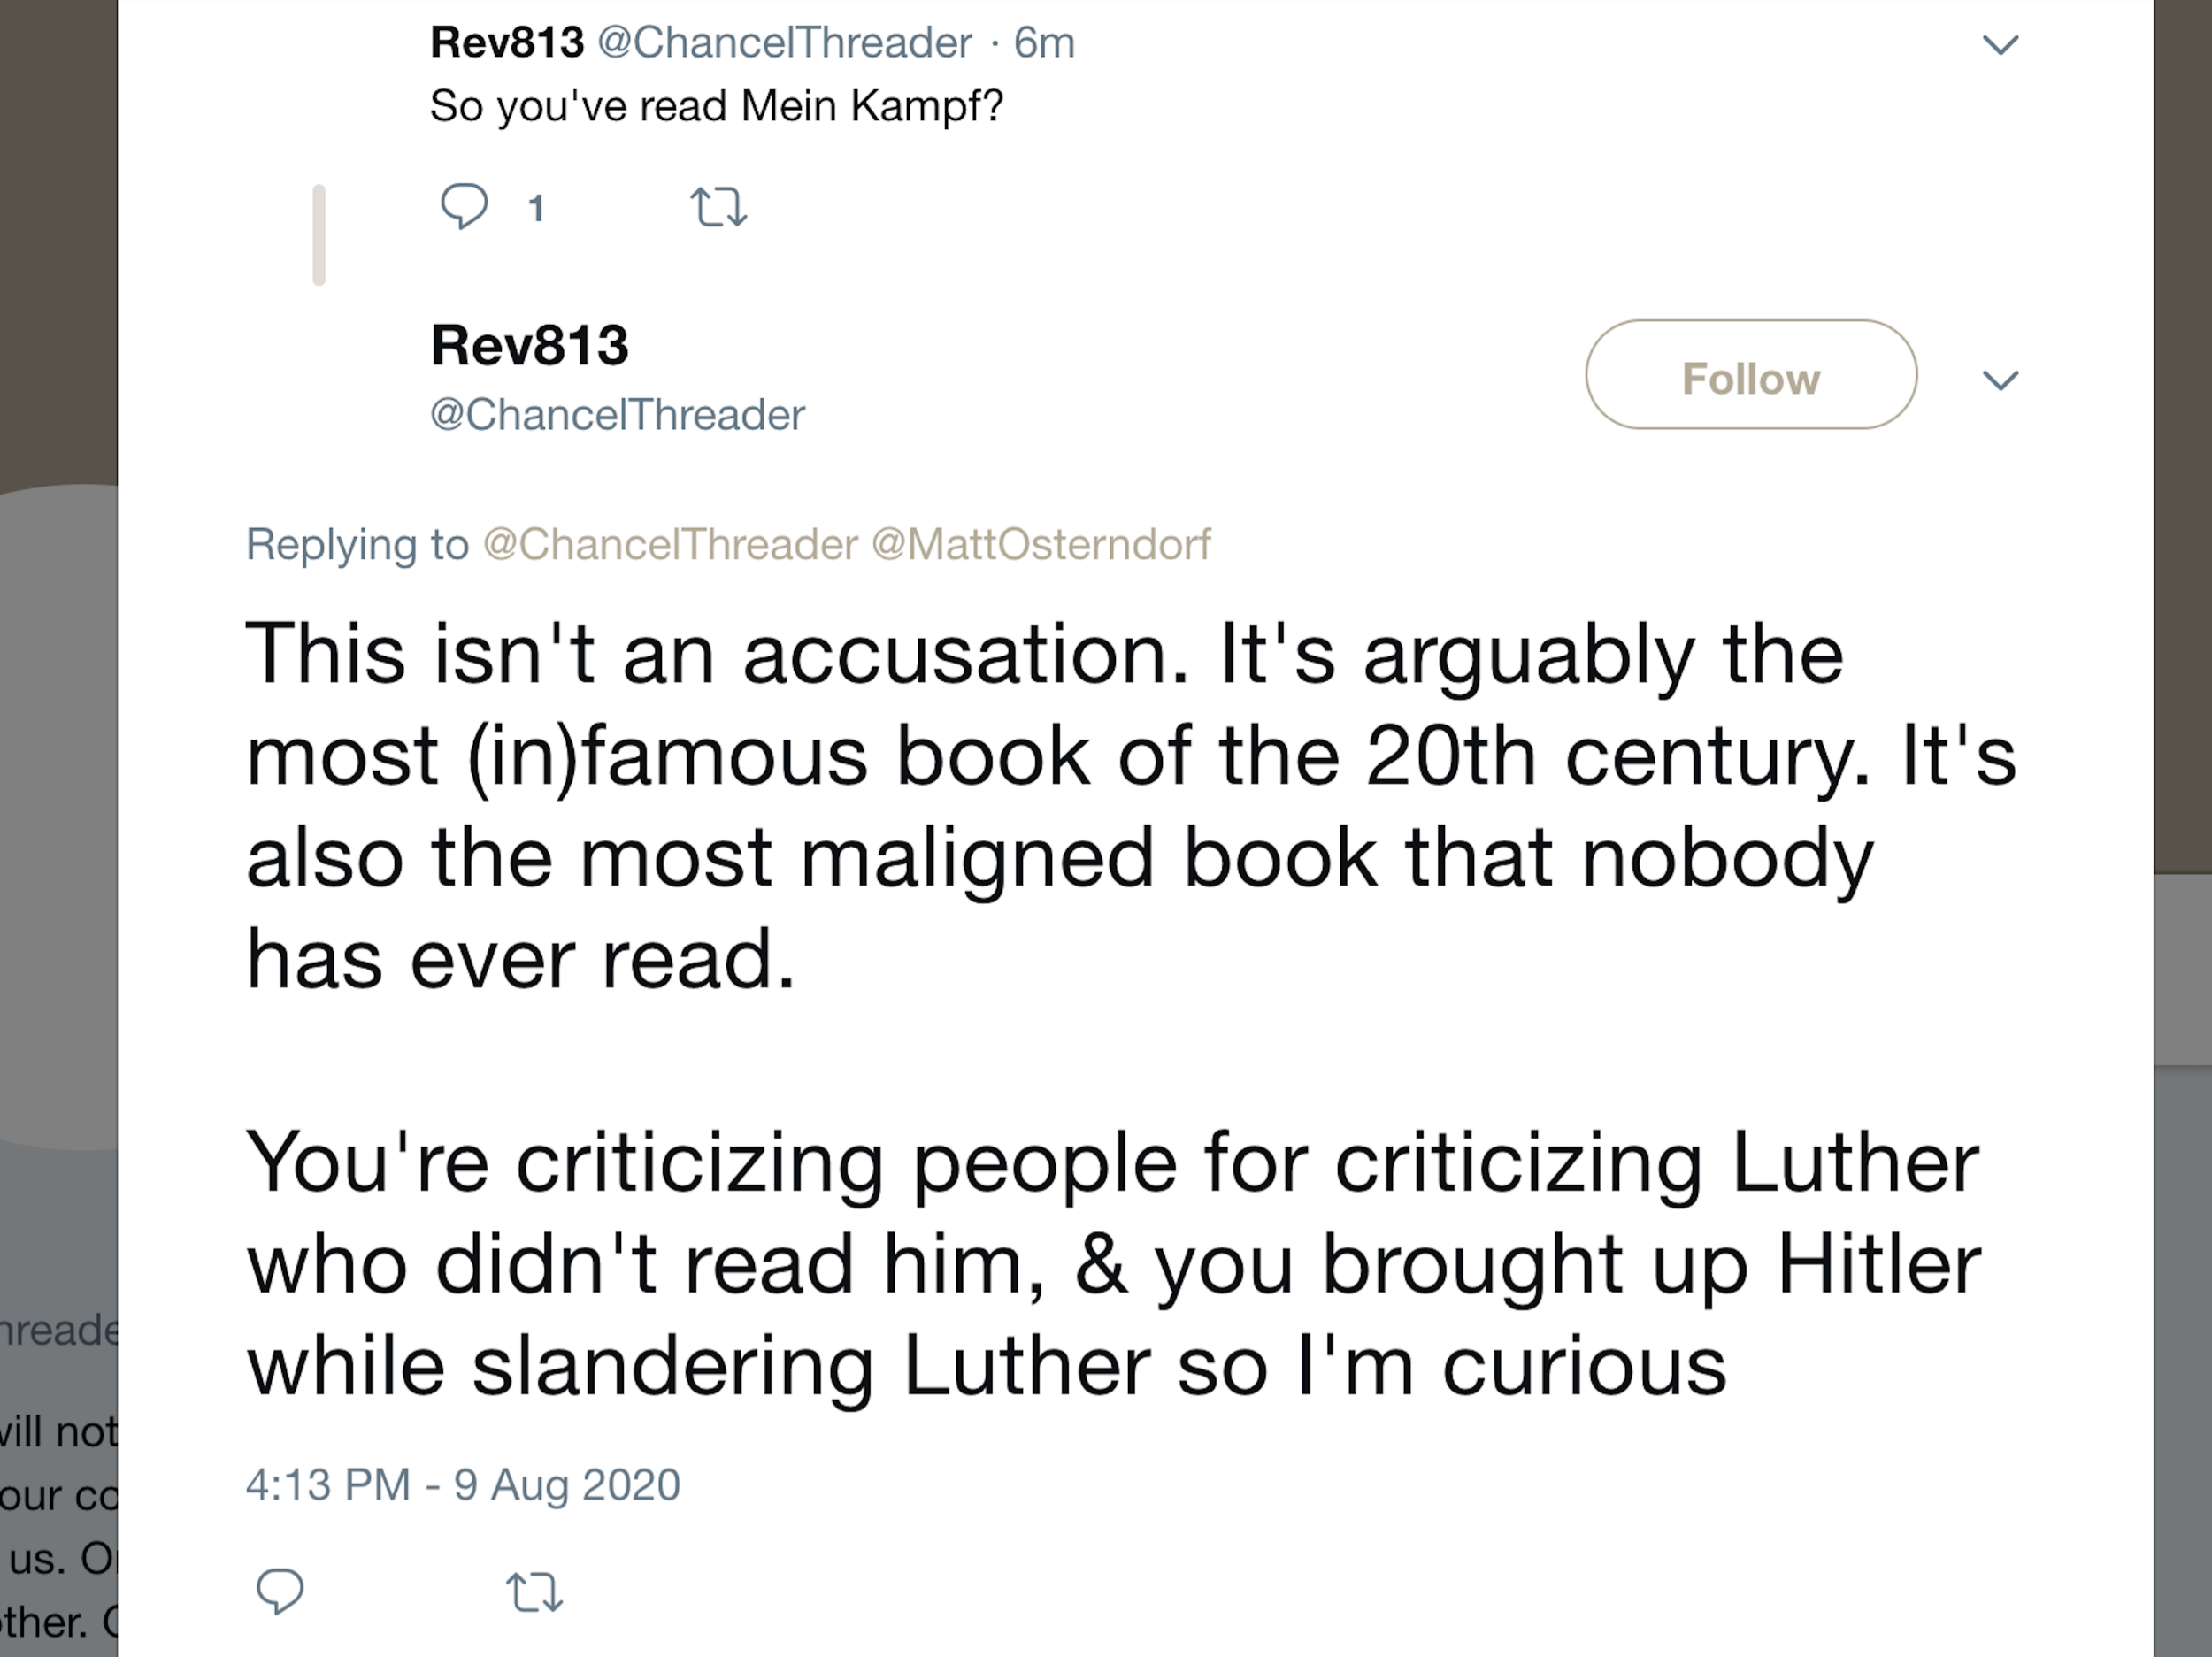 Woe asking someone if “they have read Mein Kampf” saying that he’s “just curious," on account of it being "arguably the most (in)famous book of the 20th century" as well as "the most maligned book that nobody has ever read."